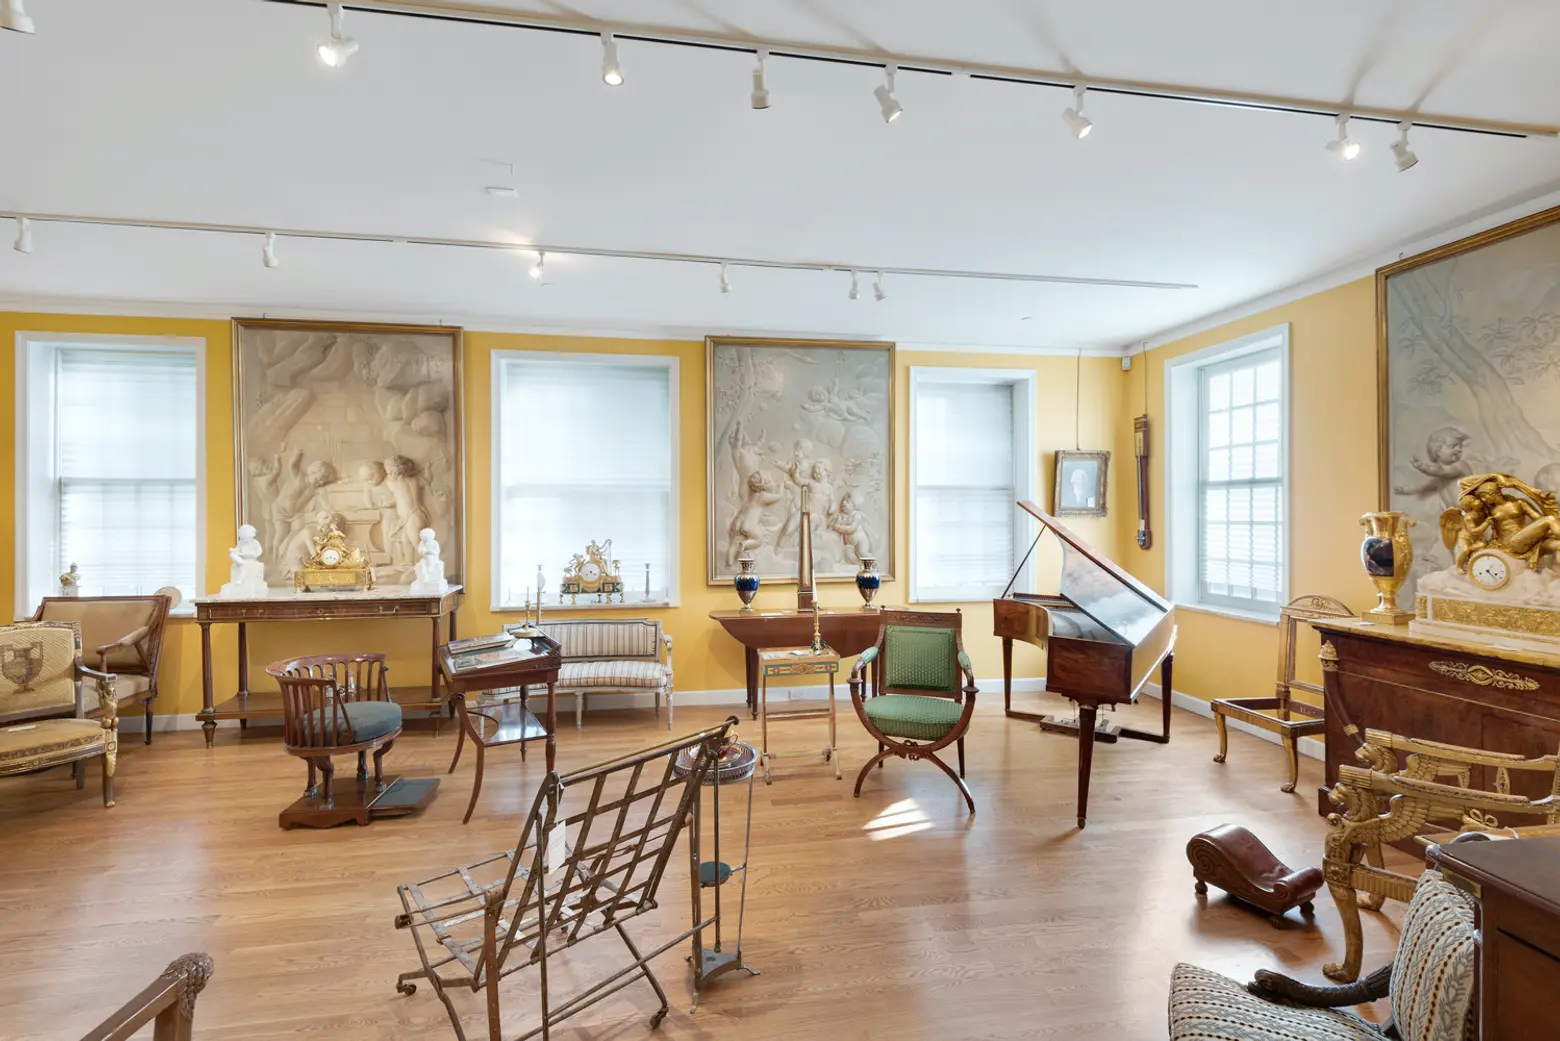 Open your own art gallery, school, or private club in this $29.5M Upper East Side mansion